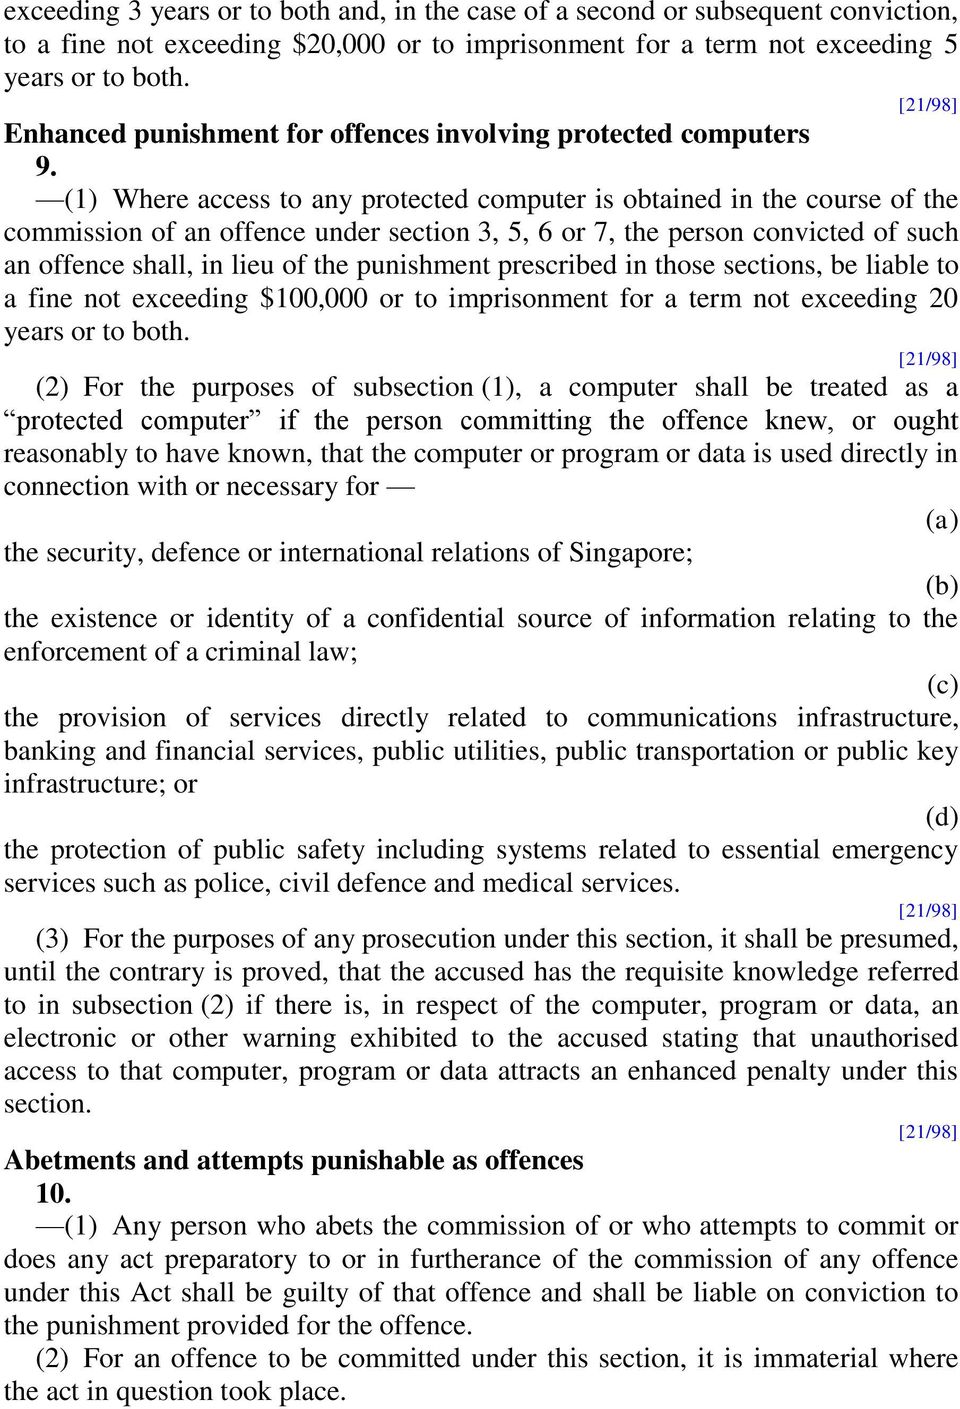 (1) Where access to any protected computer is obtained in the course of the commission of an offence under section 3, 5, 6 or 7, the person convicted of such an offence shall, in lieu of the